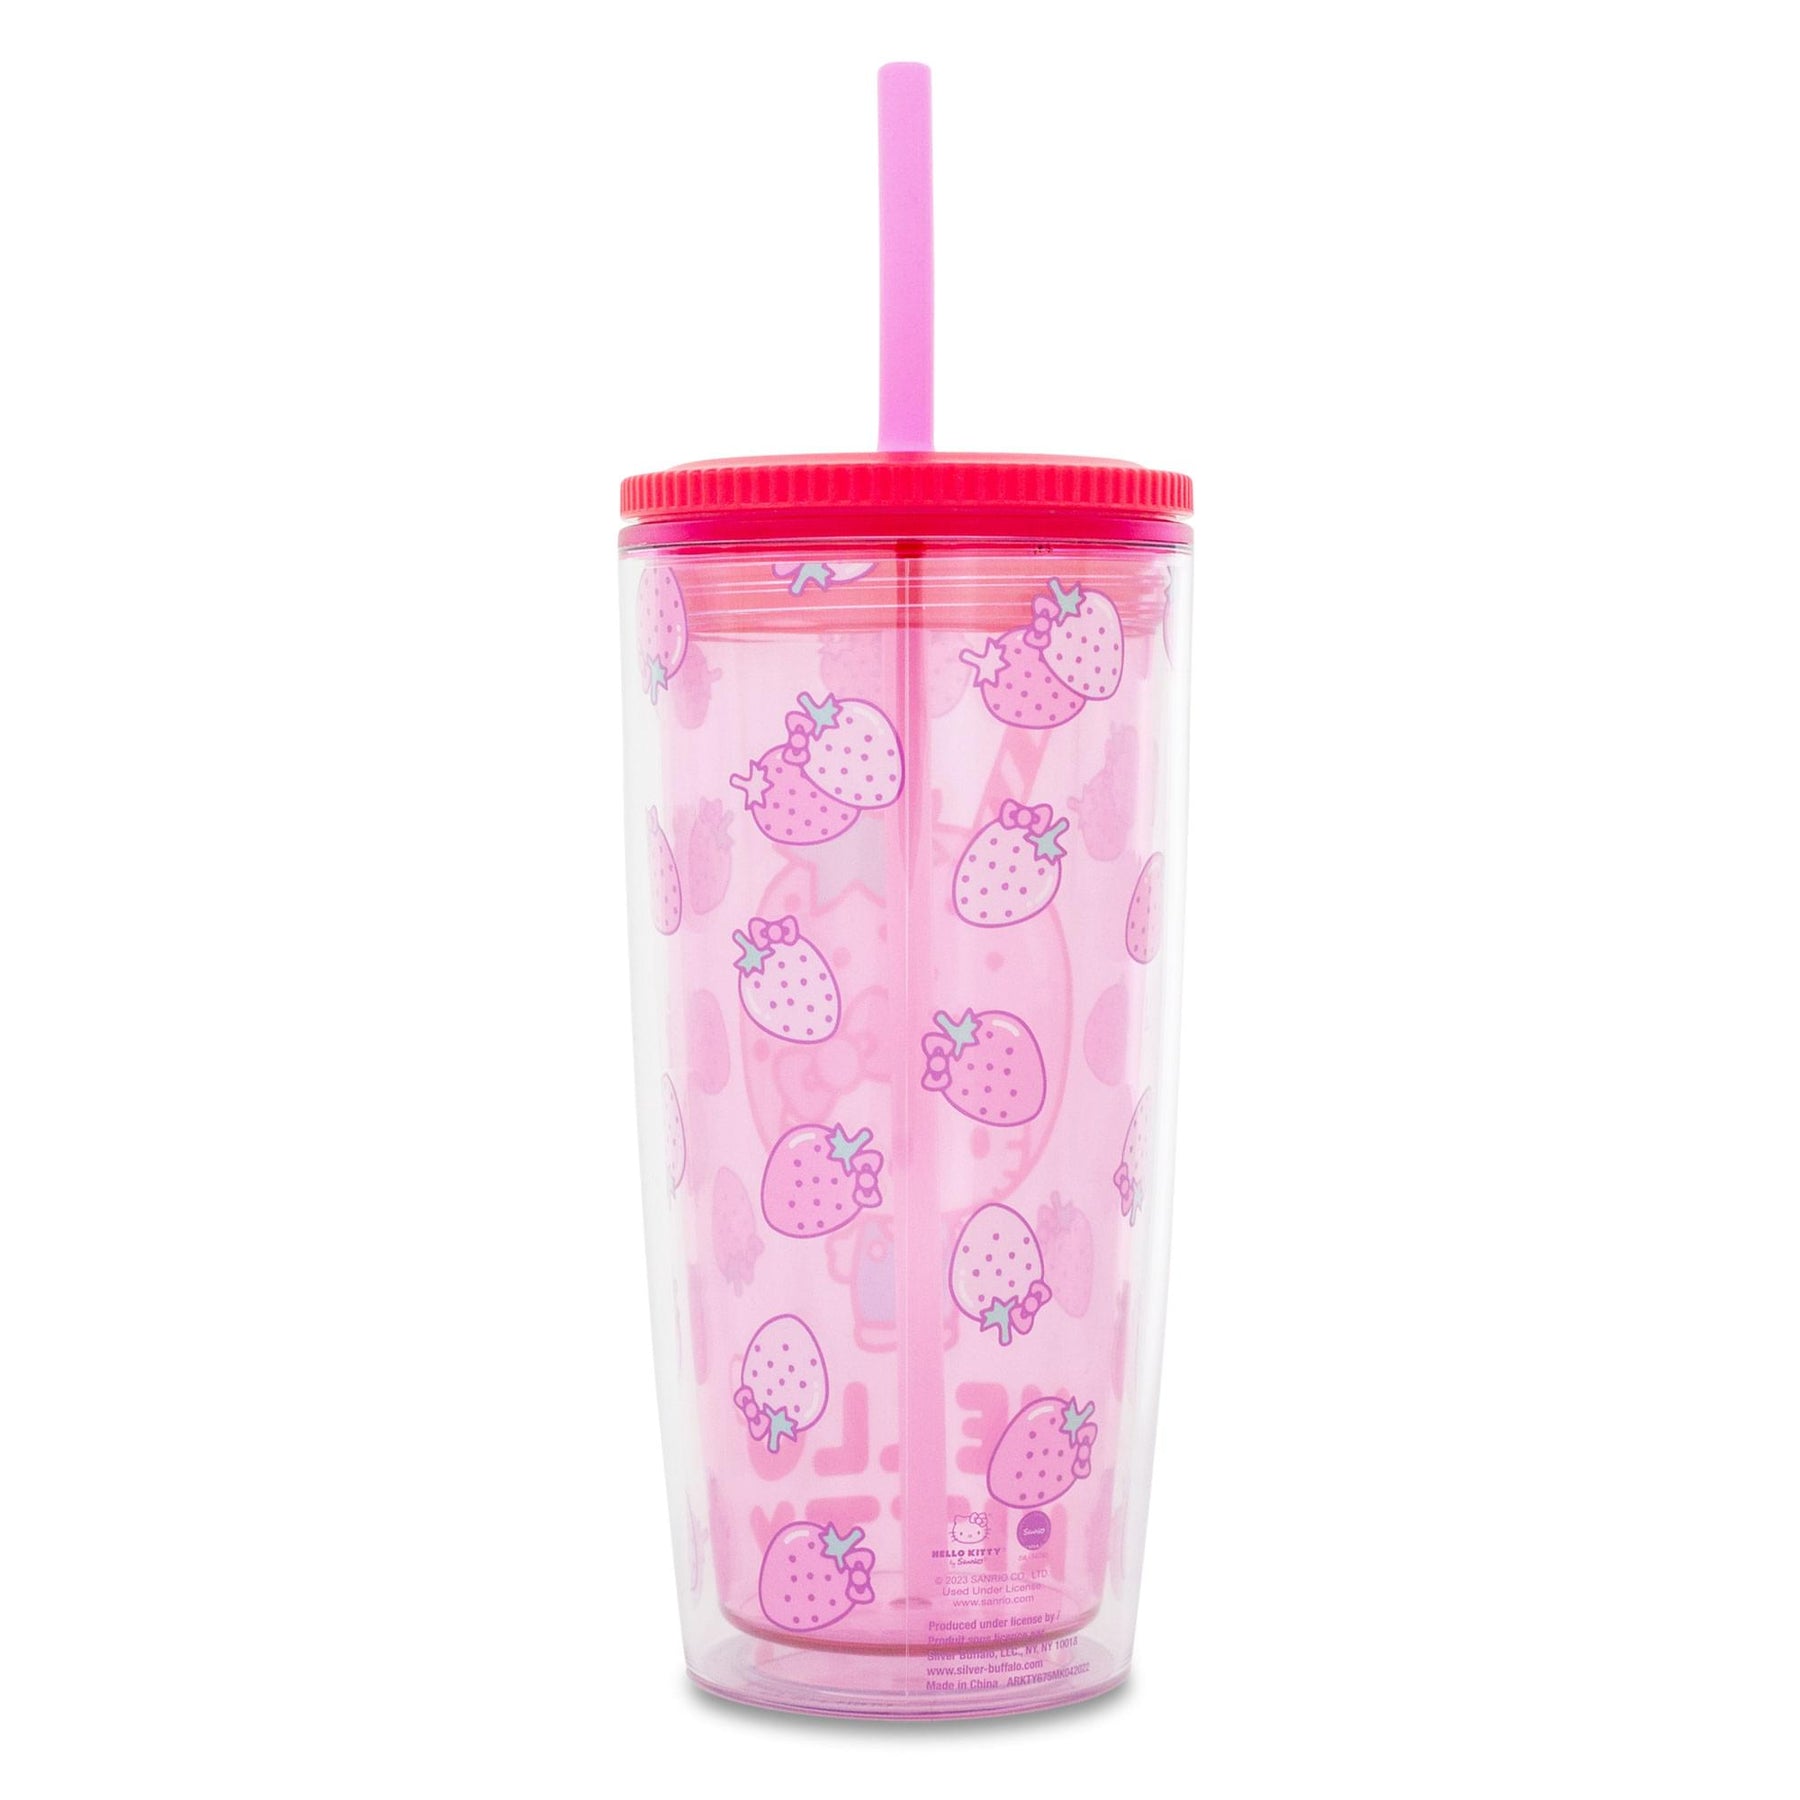 Strawberry Tumbler,Strawberry Cup-20 oz Skinny Tumbler with Lid and  Straw-Birthday Gifts for Women-Strawberry Decor,Strawberry  Accessories-Insulated